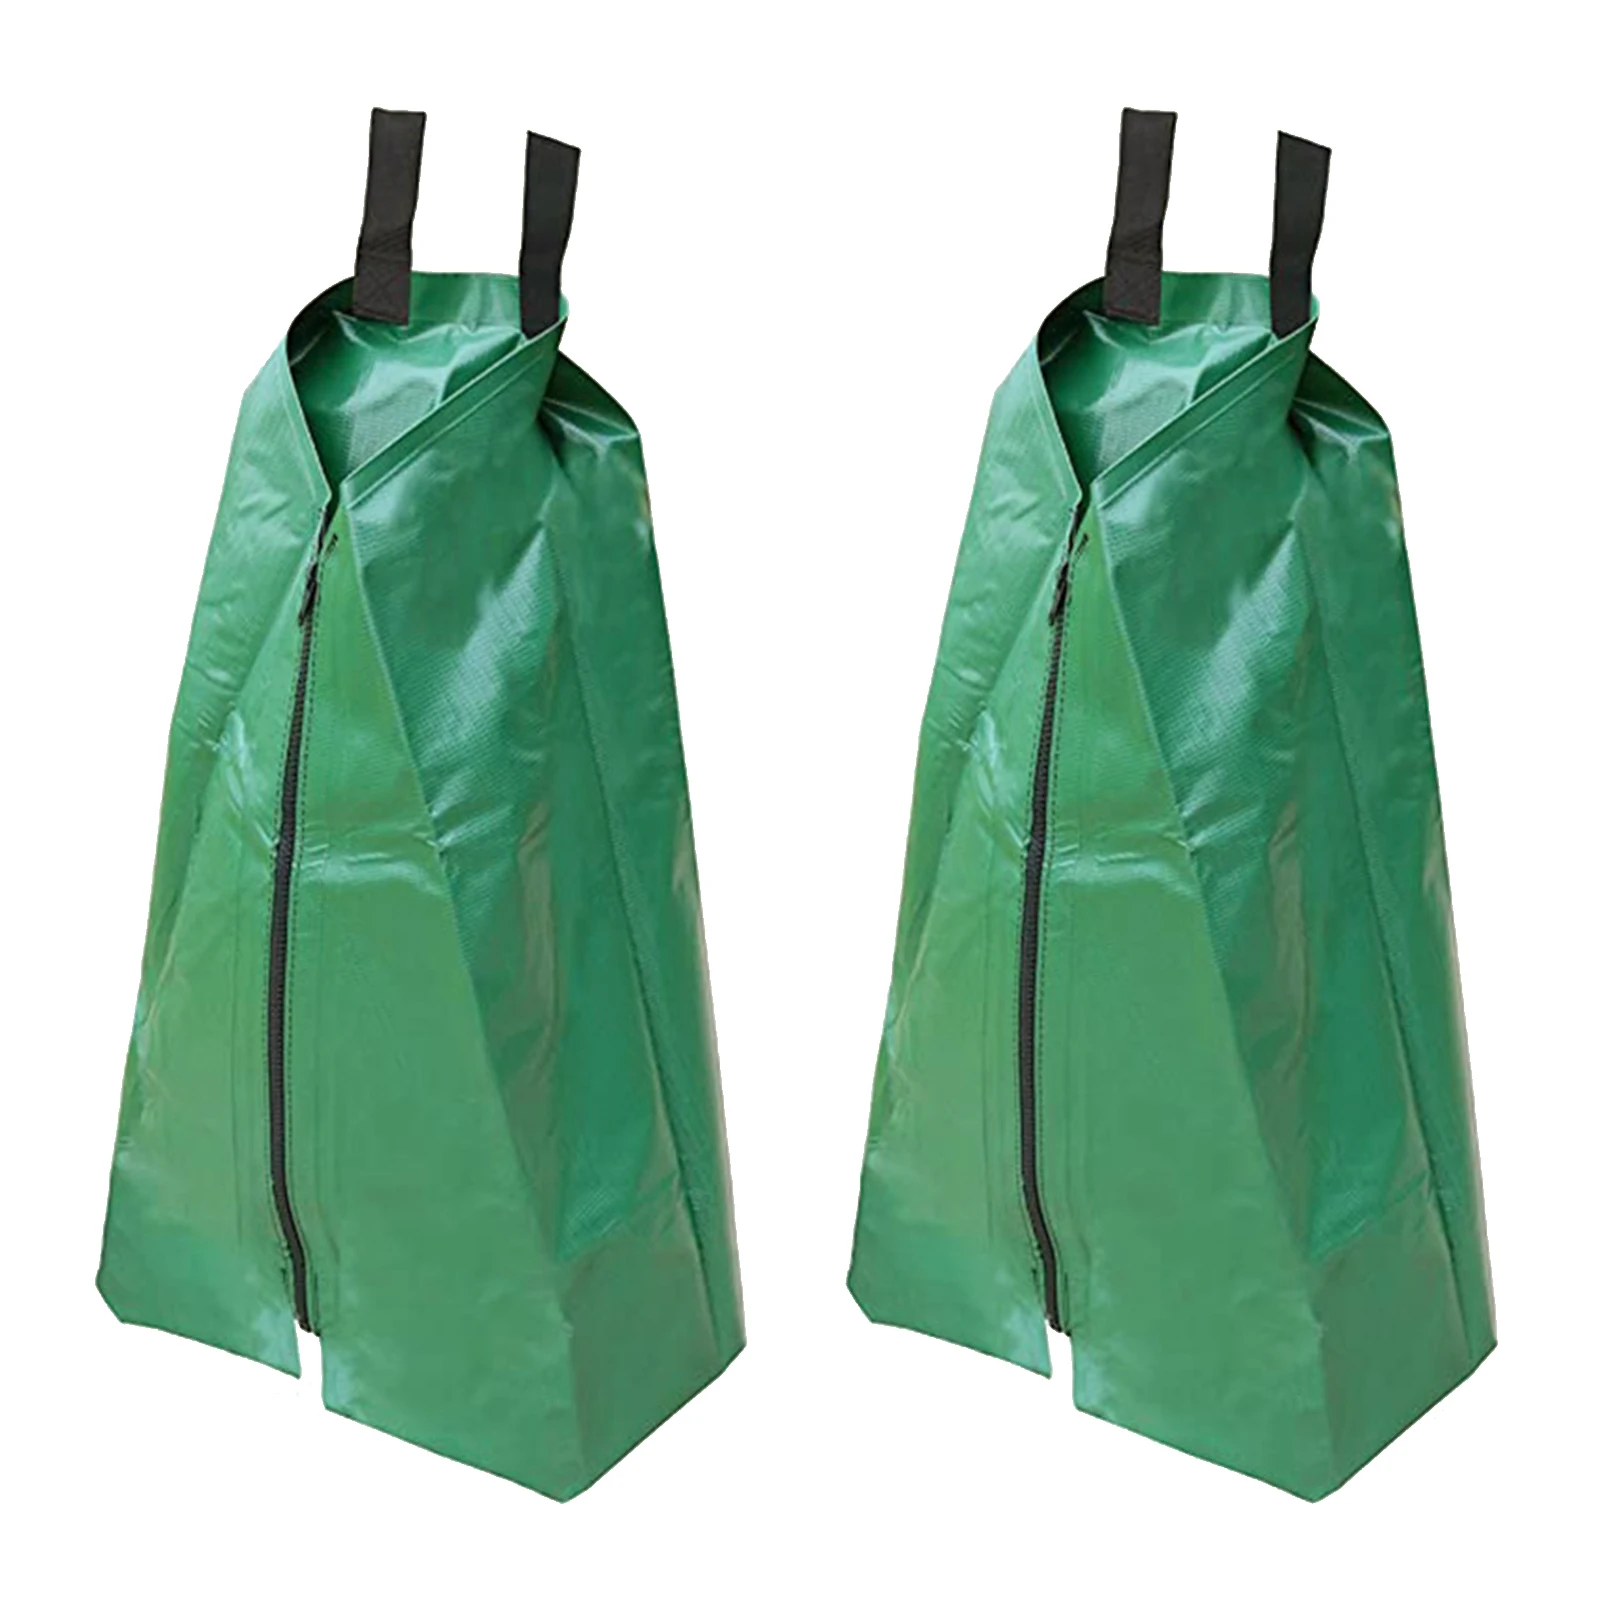 2pcs PVC Reusable Automatic Continuous Tree Watering Bag 20 Gallon Ring Shape Drip Plants UV Stable Large Green Slow Release